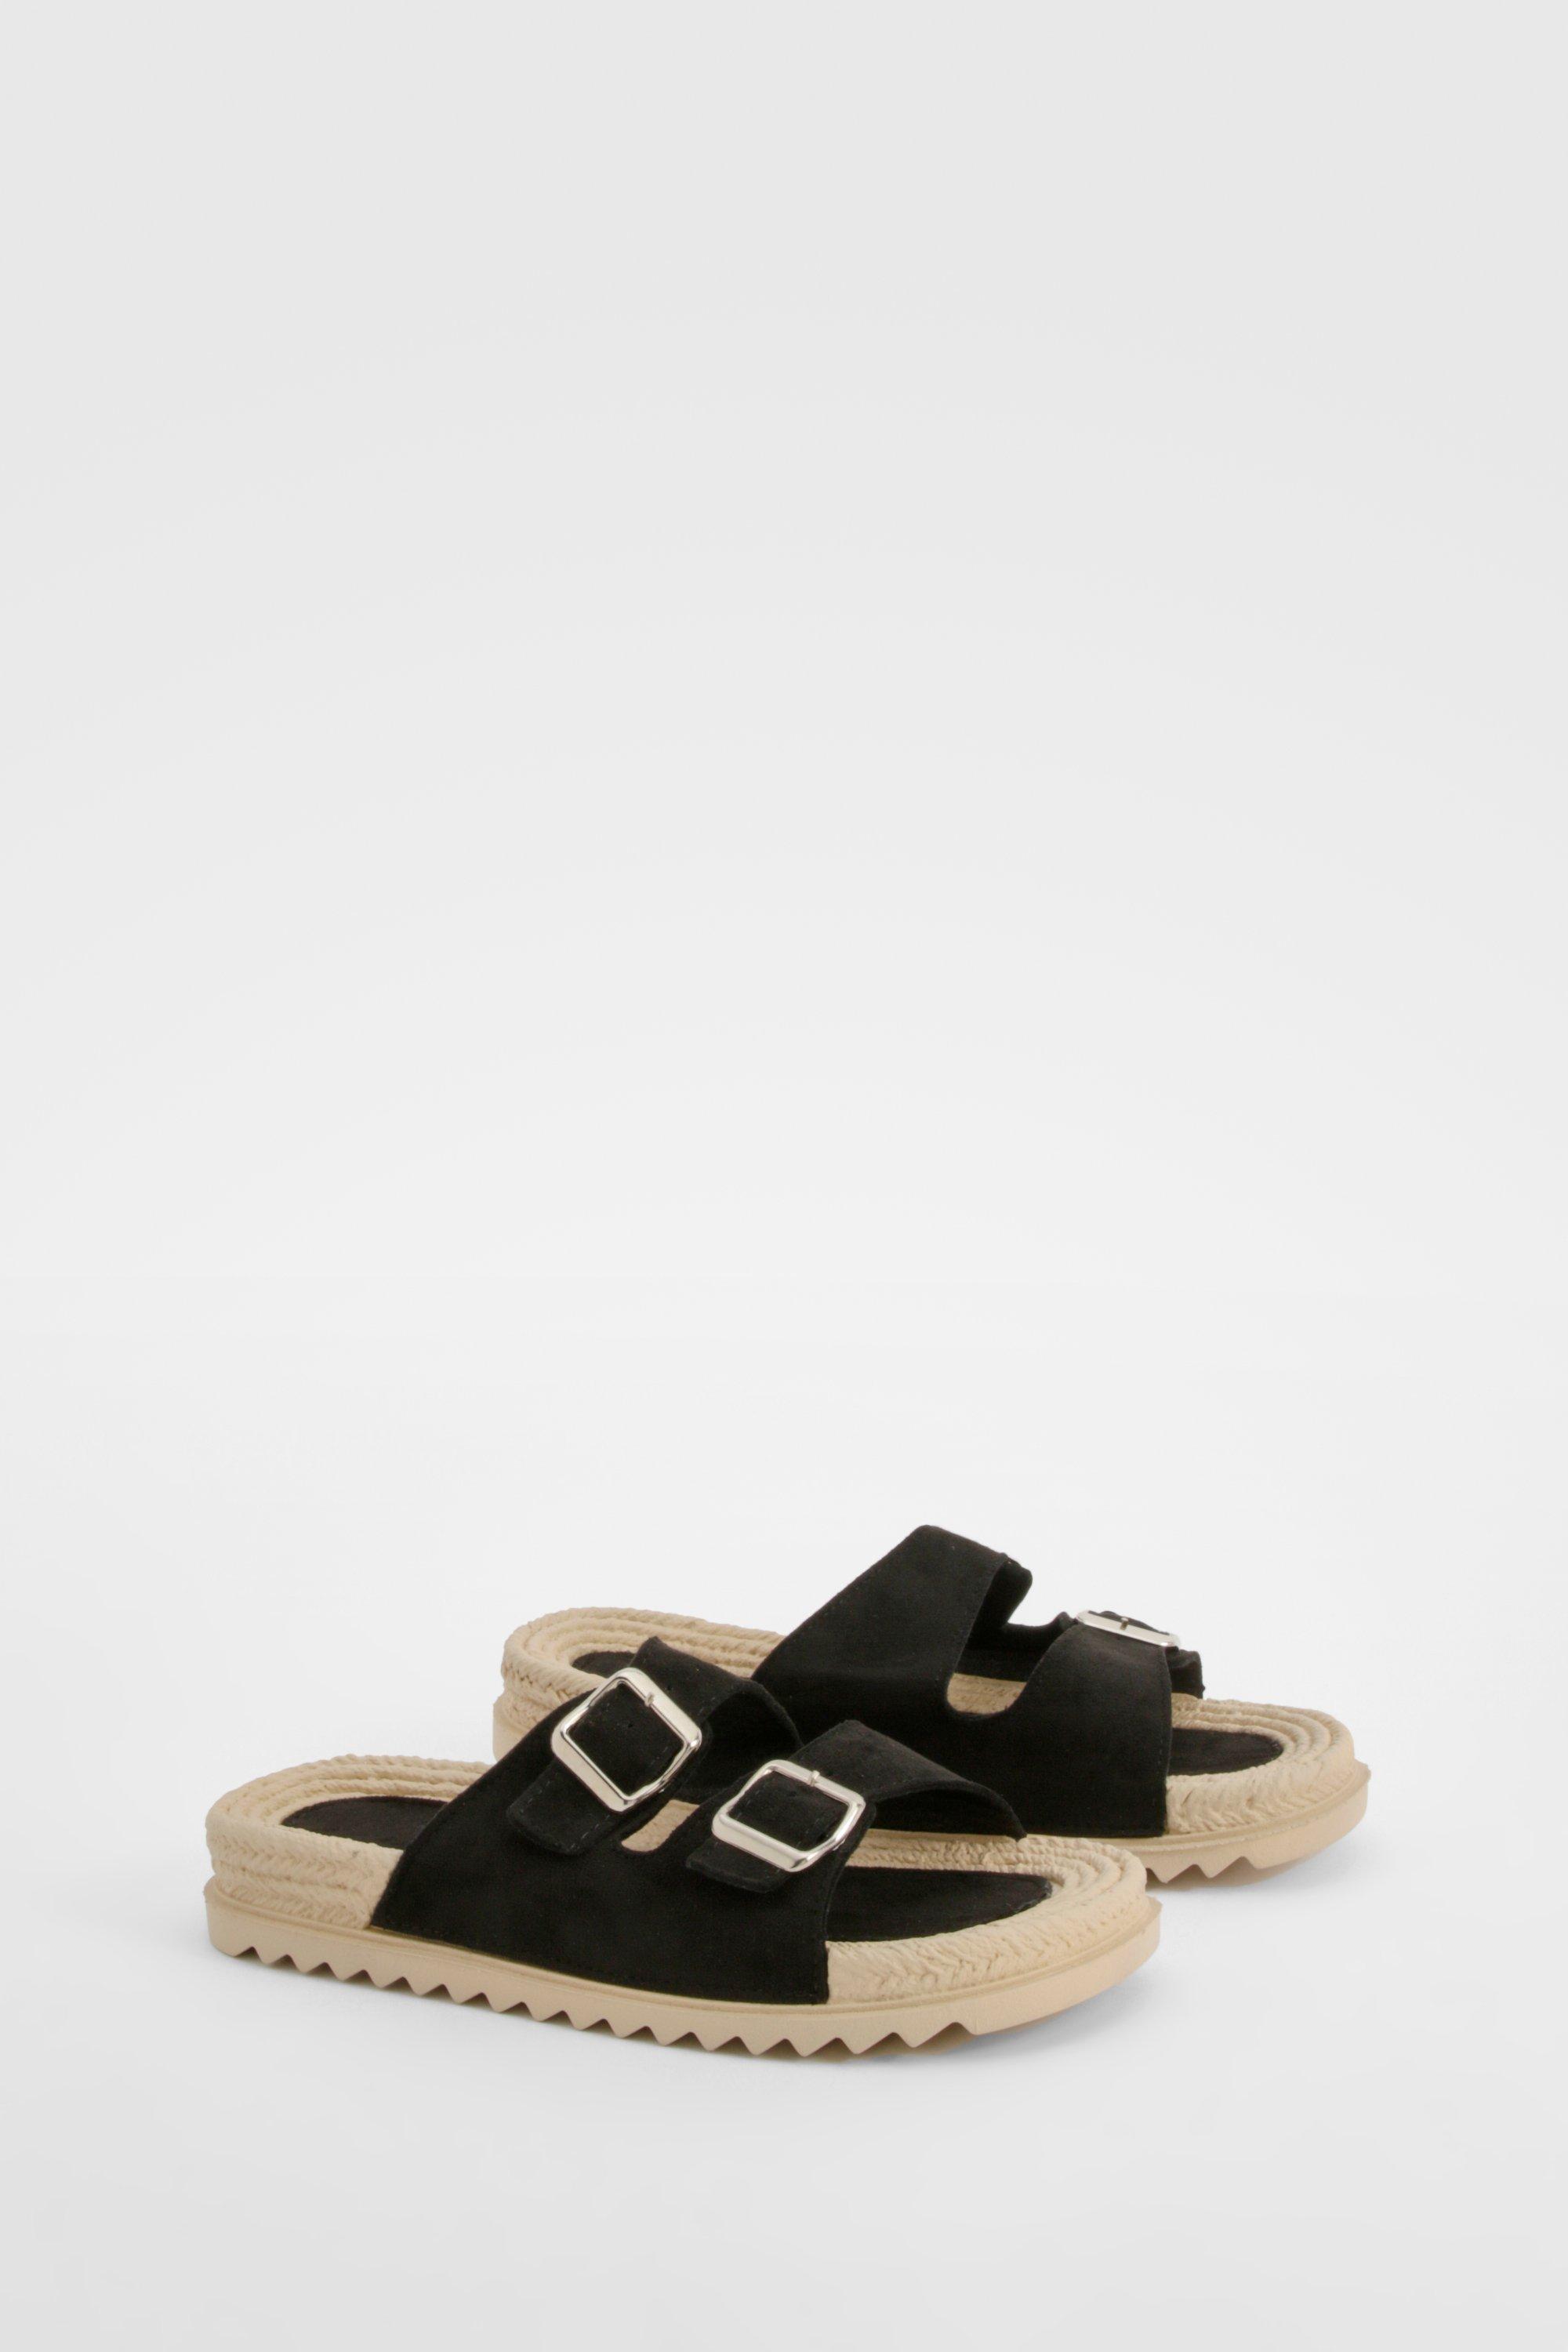 Image of Double Strap Buckle Detail Espadrille Sliders, Nero